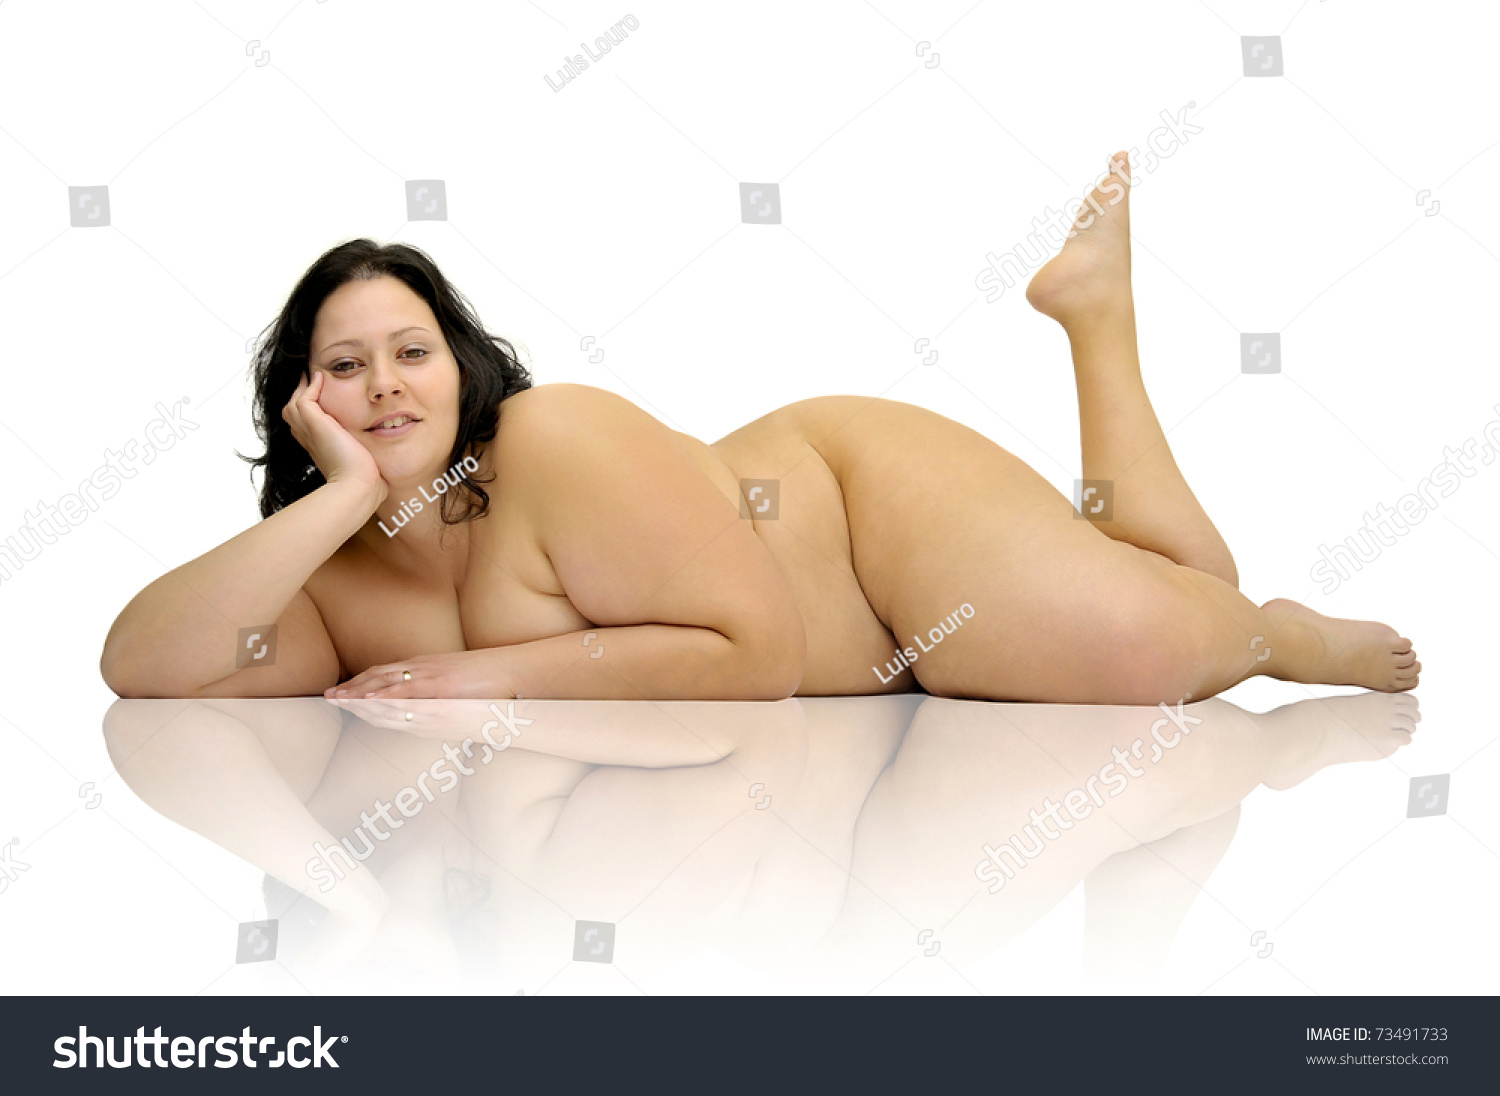 Mitosis Diagram Images Stock Photos Vectors Shutterstock Hot Sex Picture